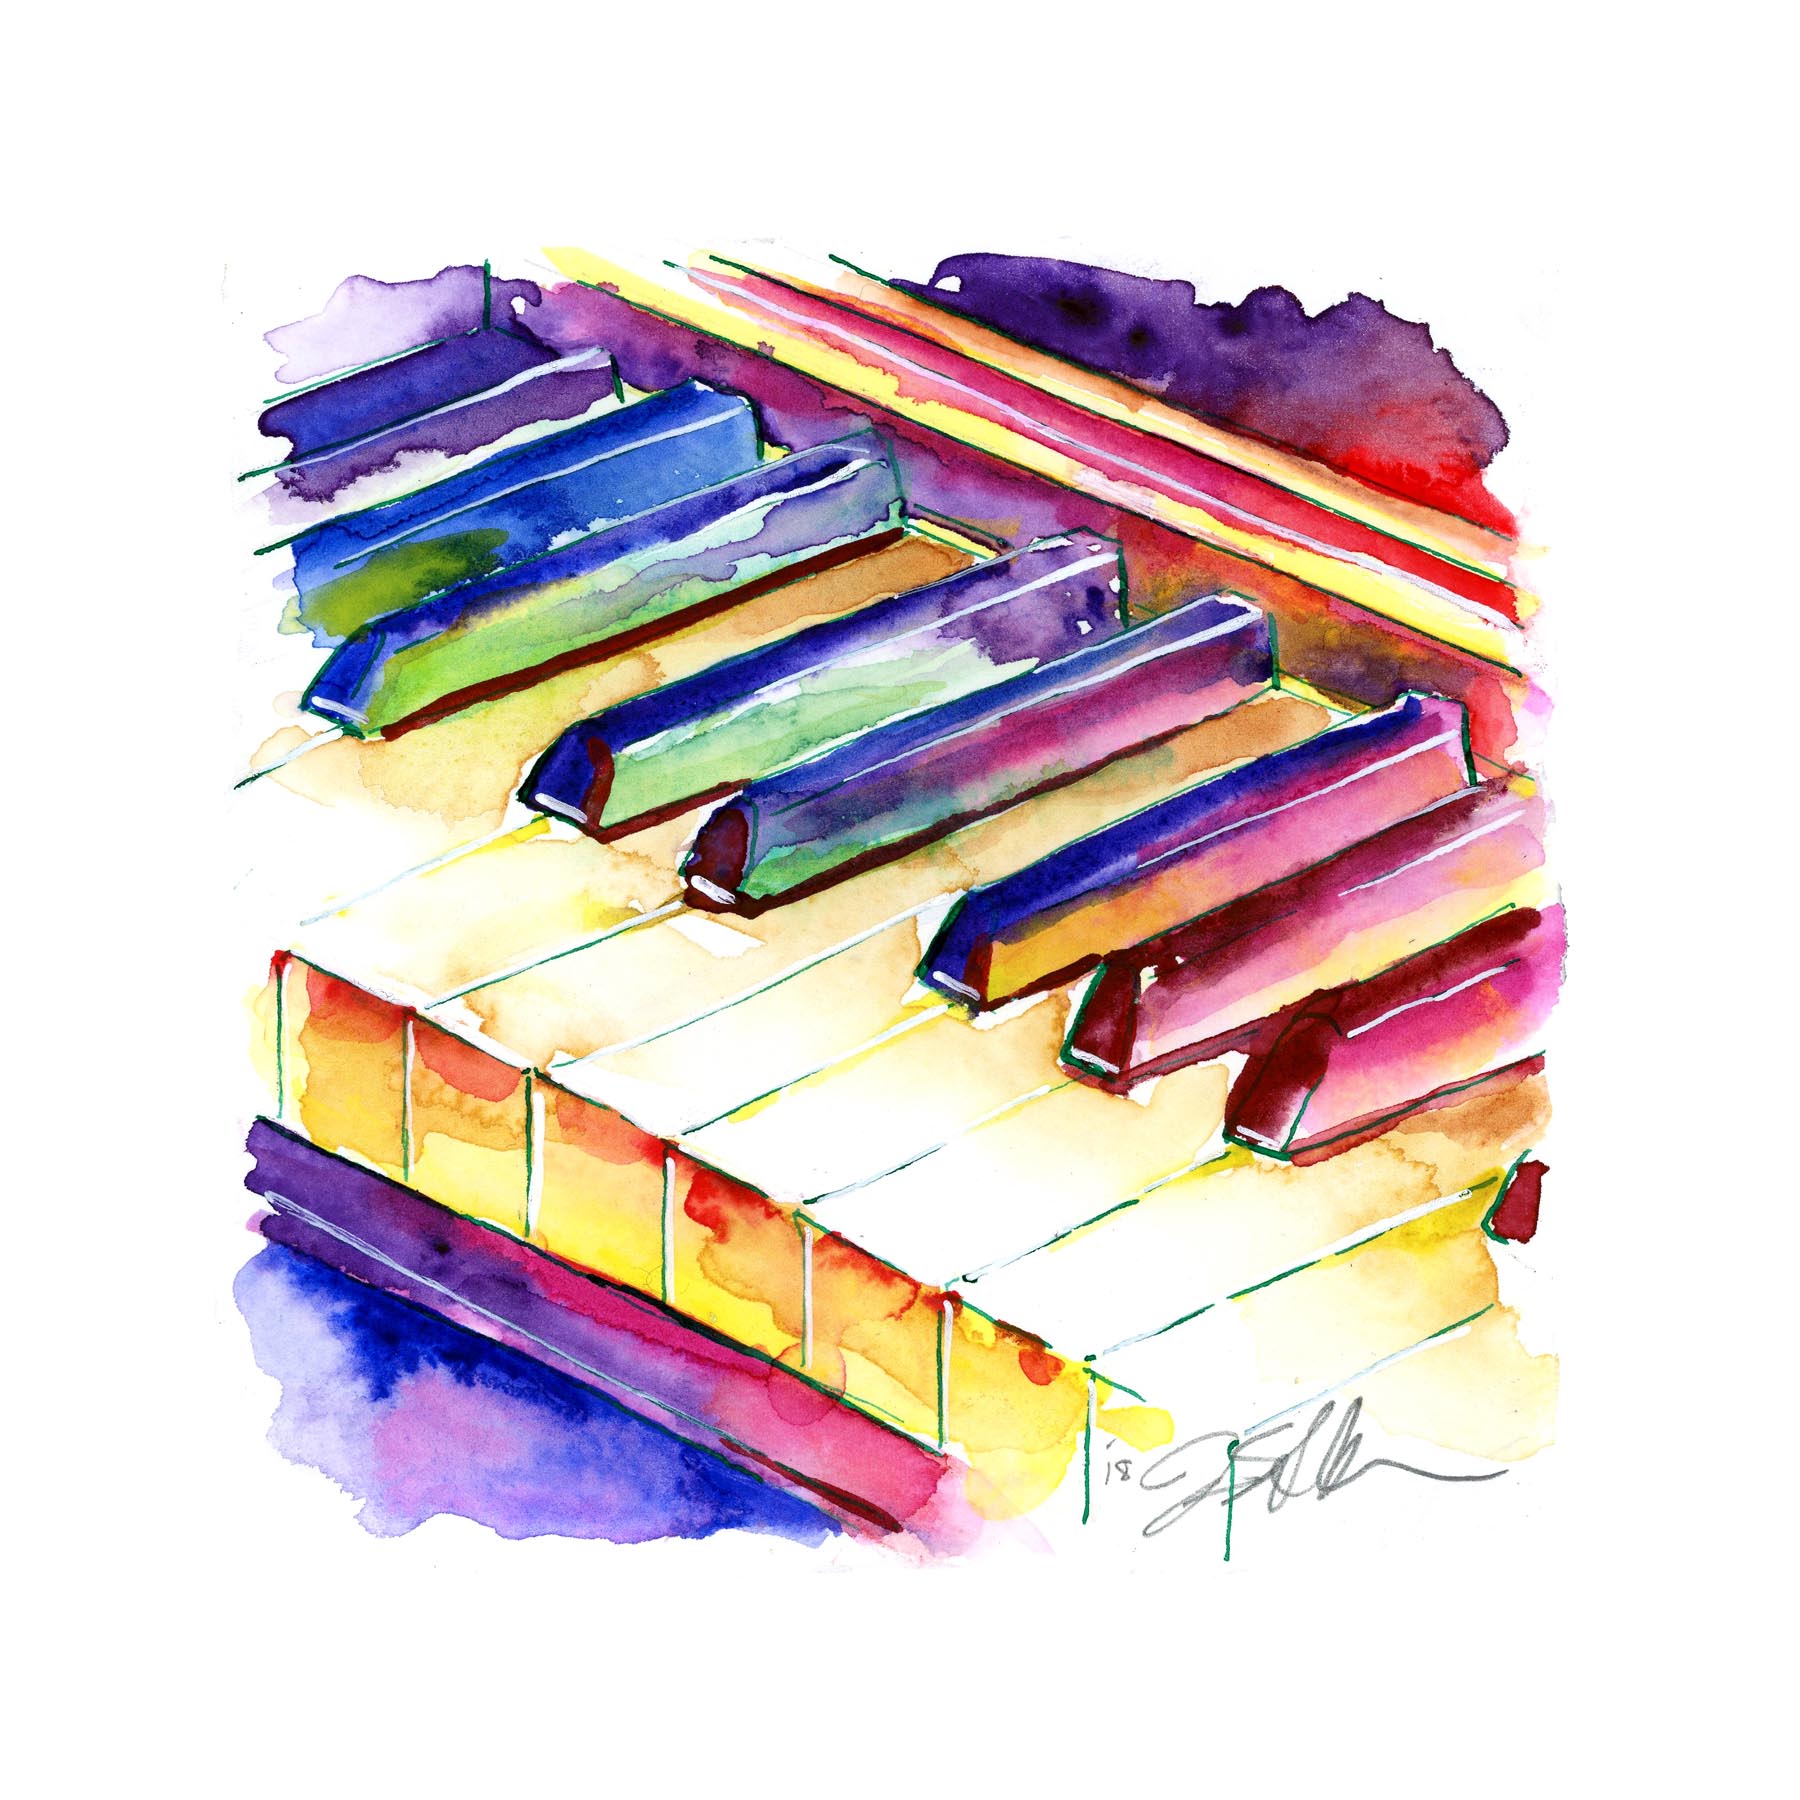 Cunningham, Brightly colored watercolor of a musical instrument in watercolor